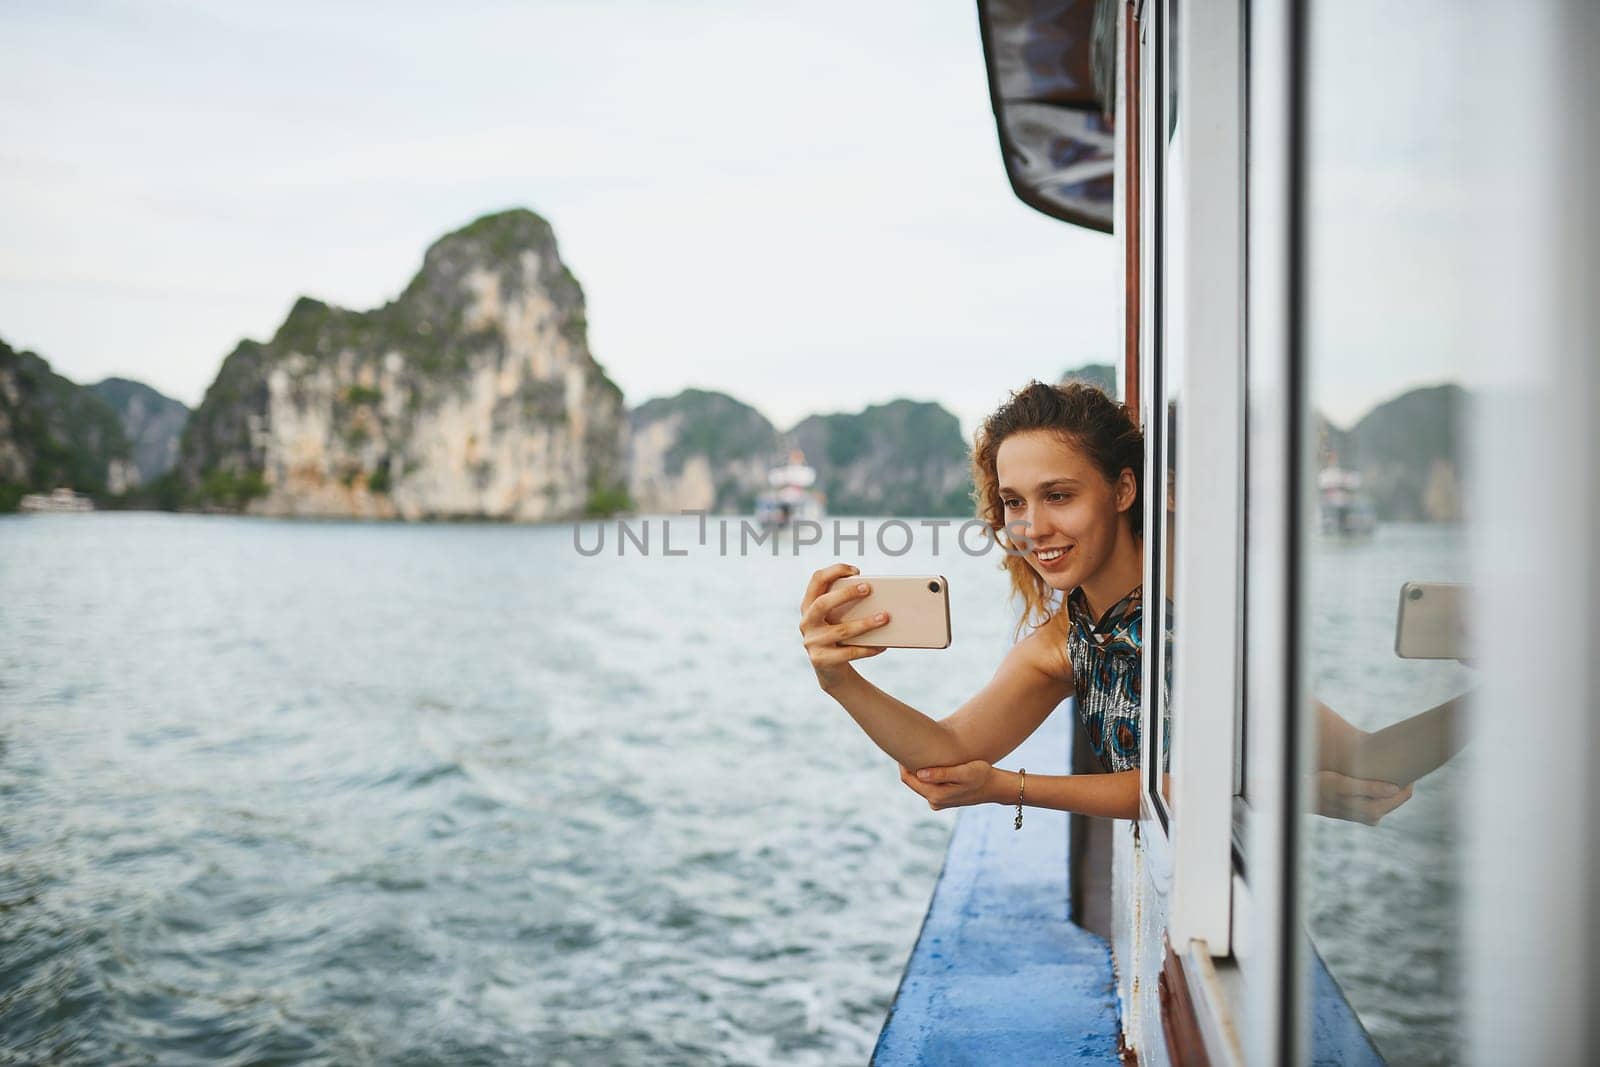 Life is a photo album full of memories. a young woman taking selfies on a boat ride in Vietnam with her smartphone